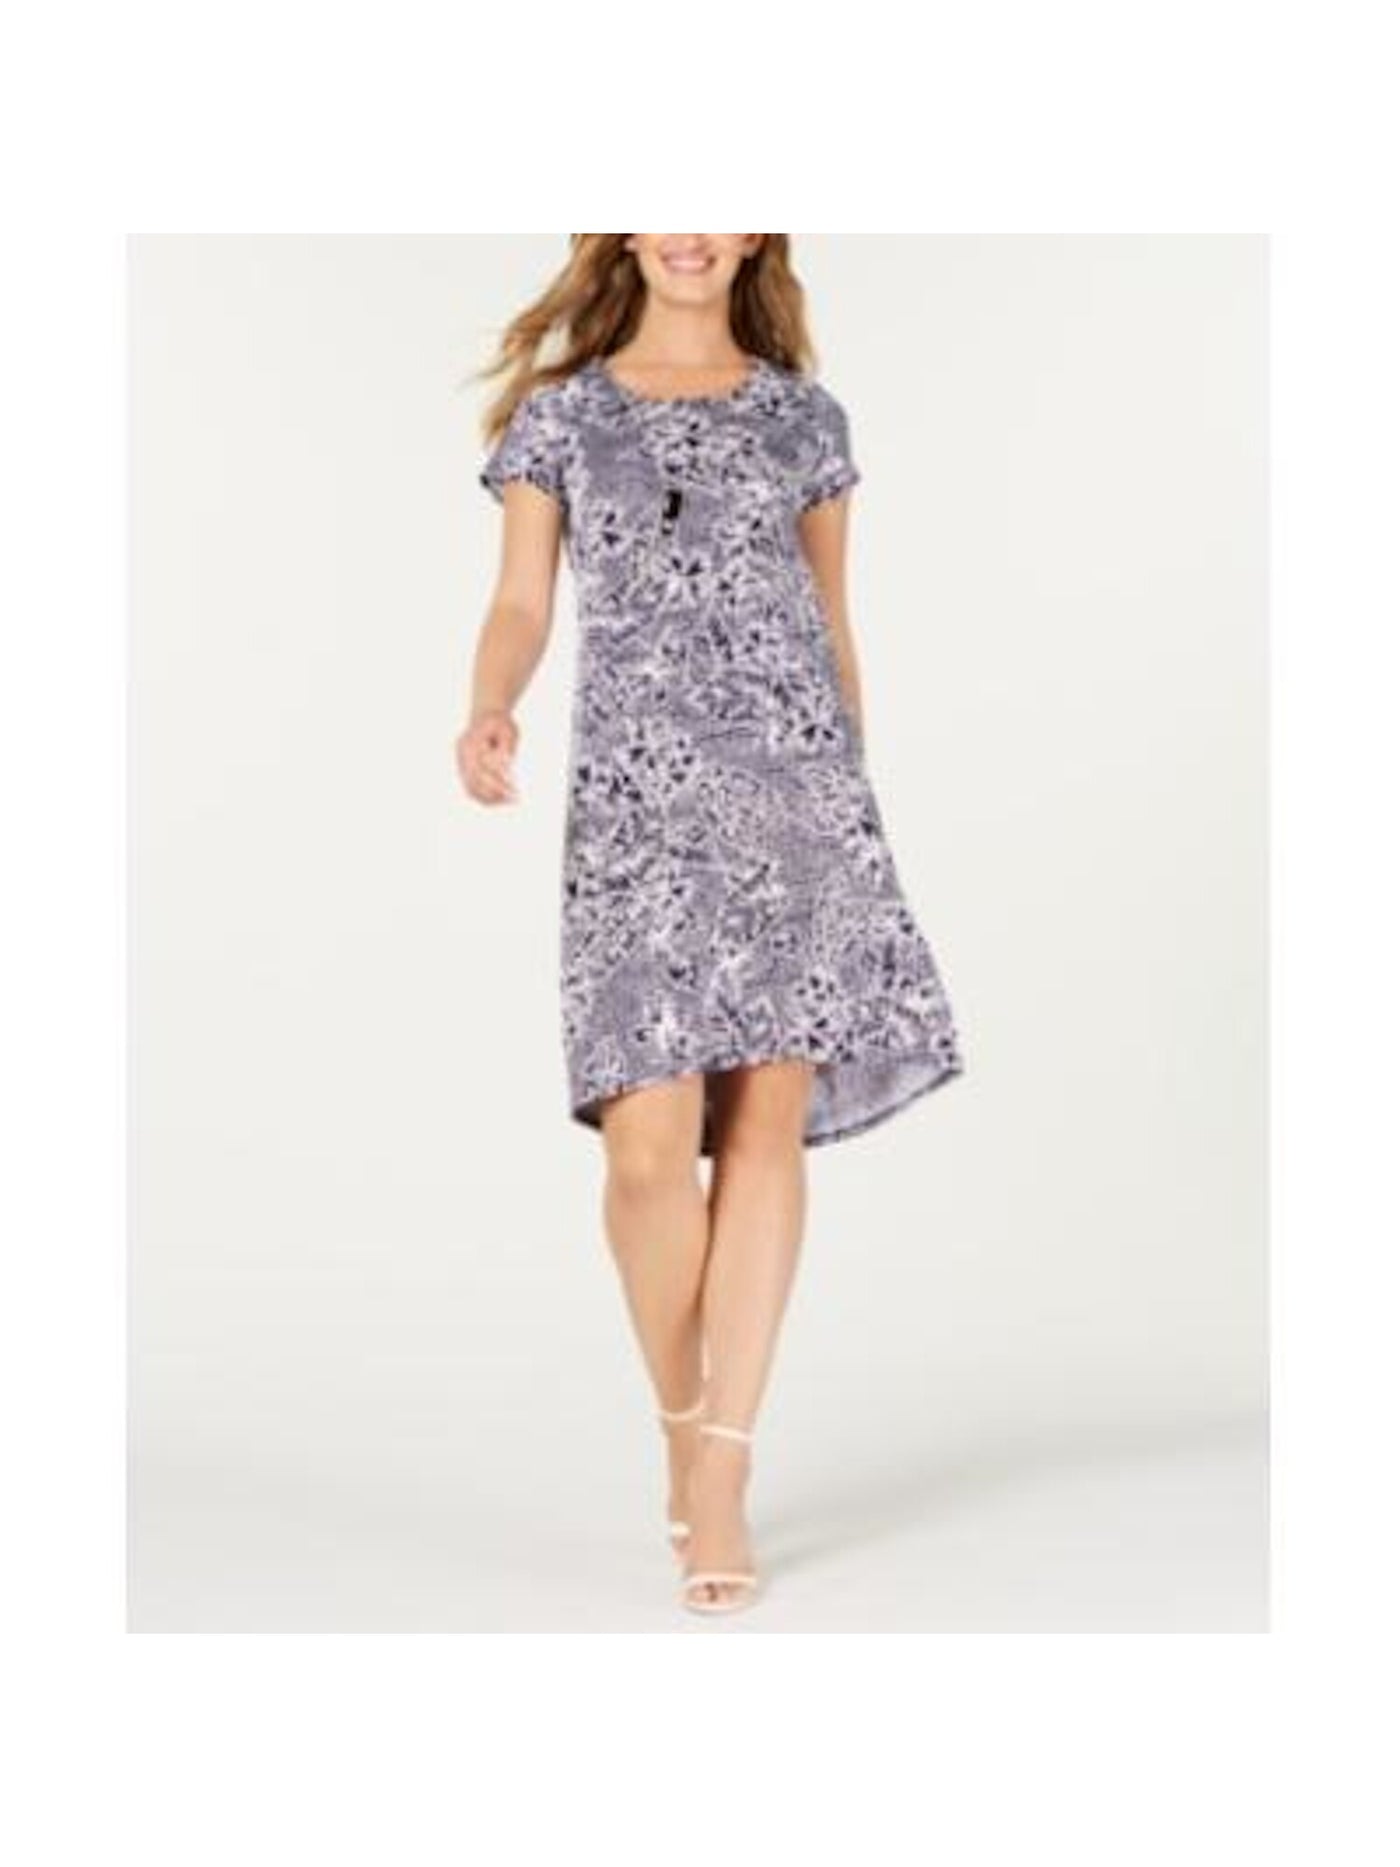 NY COLLECTION Womens Navy With Necklace Printed Short Sleeve Crew Neck Above The Knee Party Shirt Dress Petites PXS